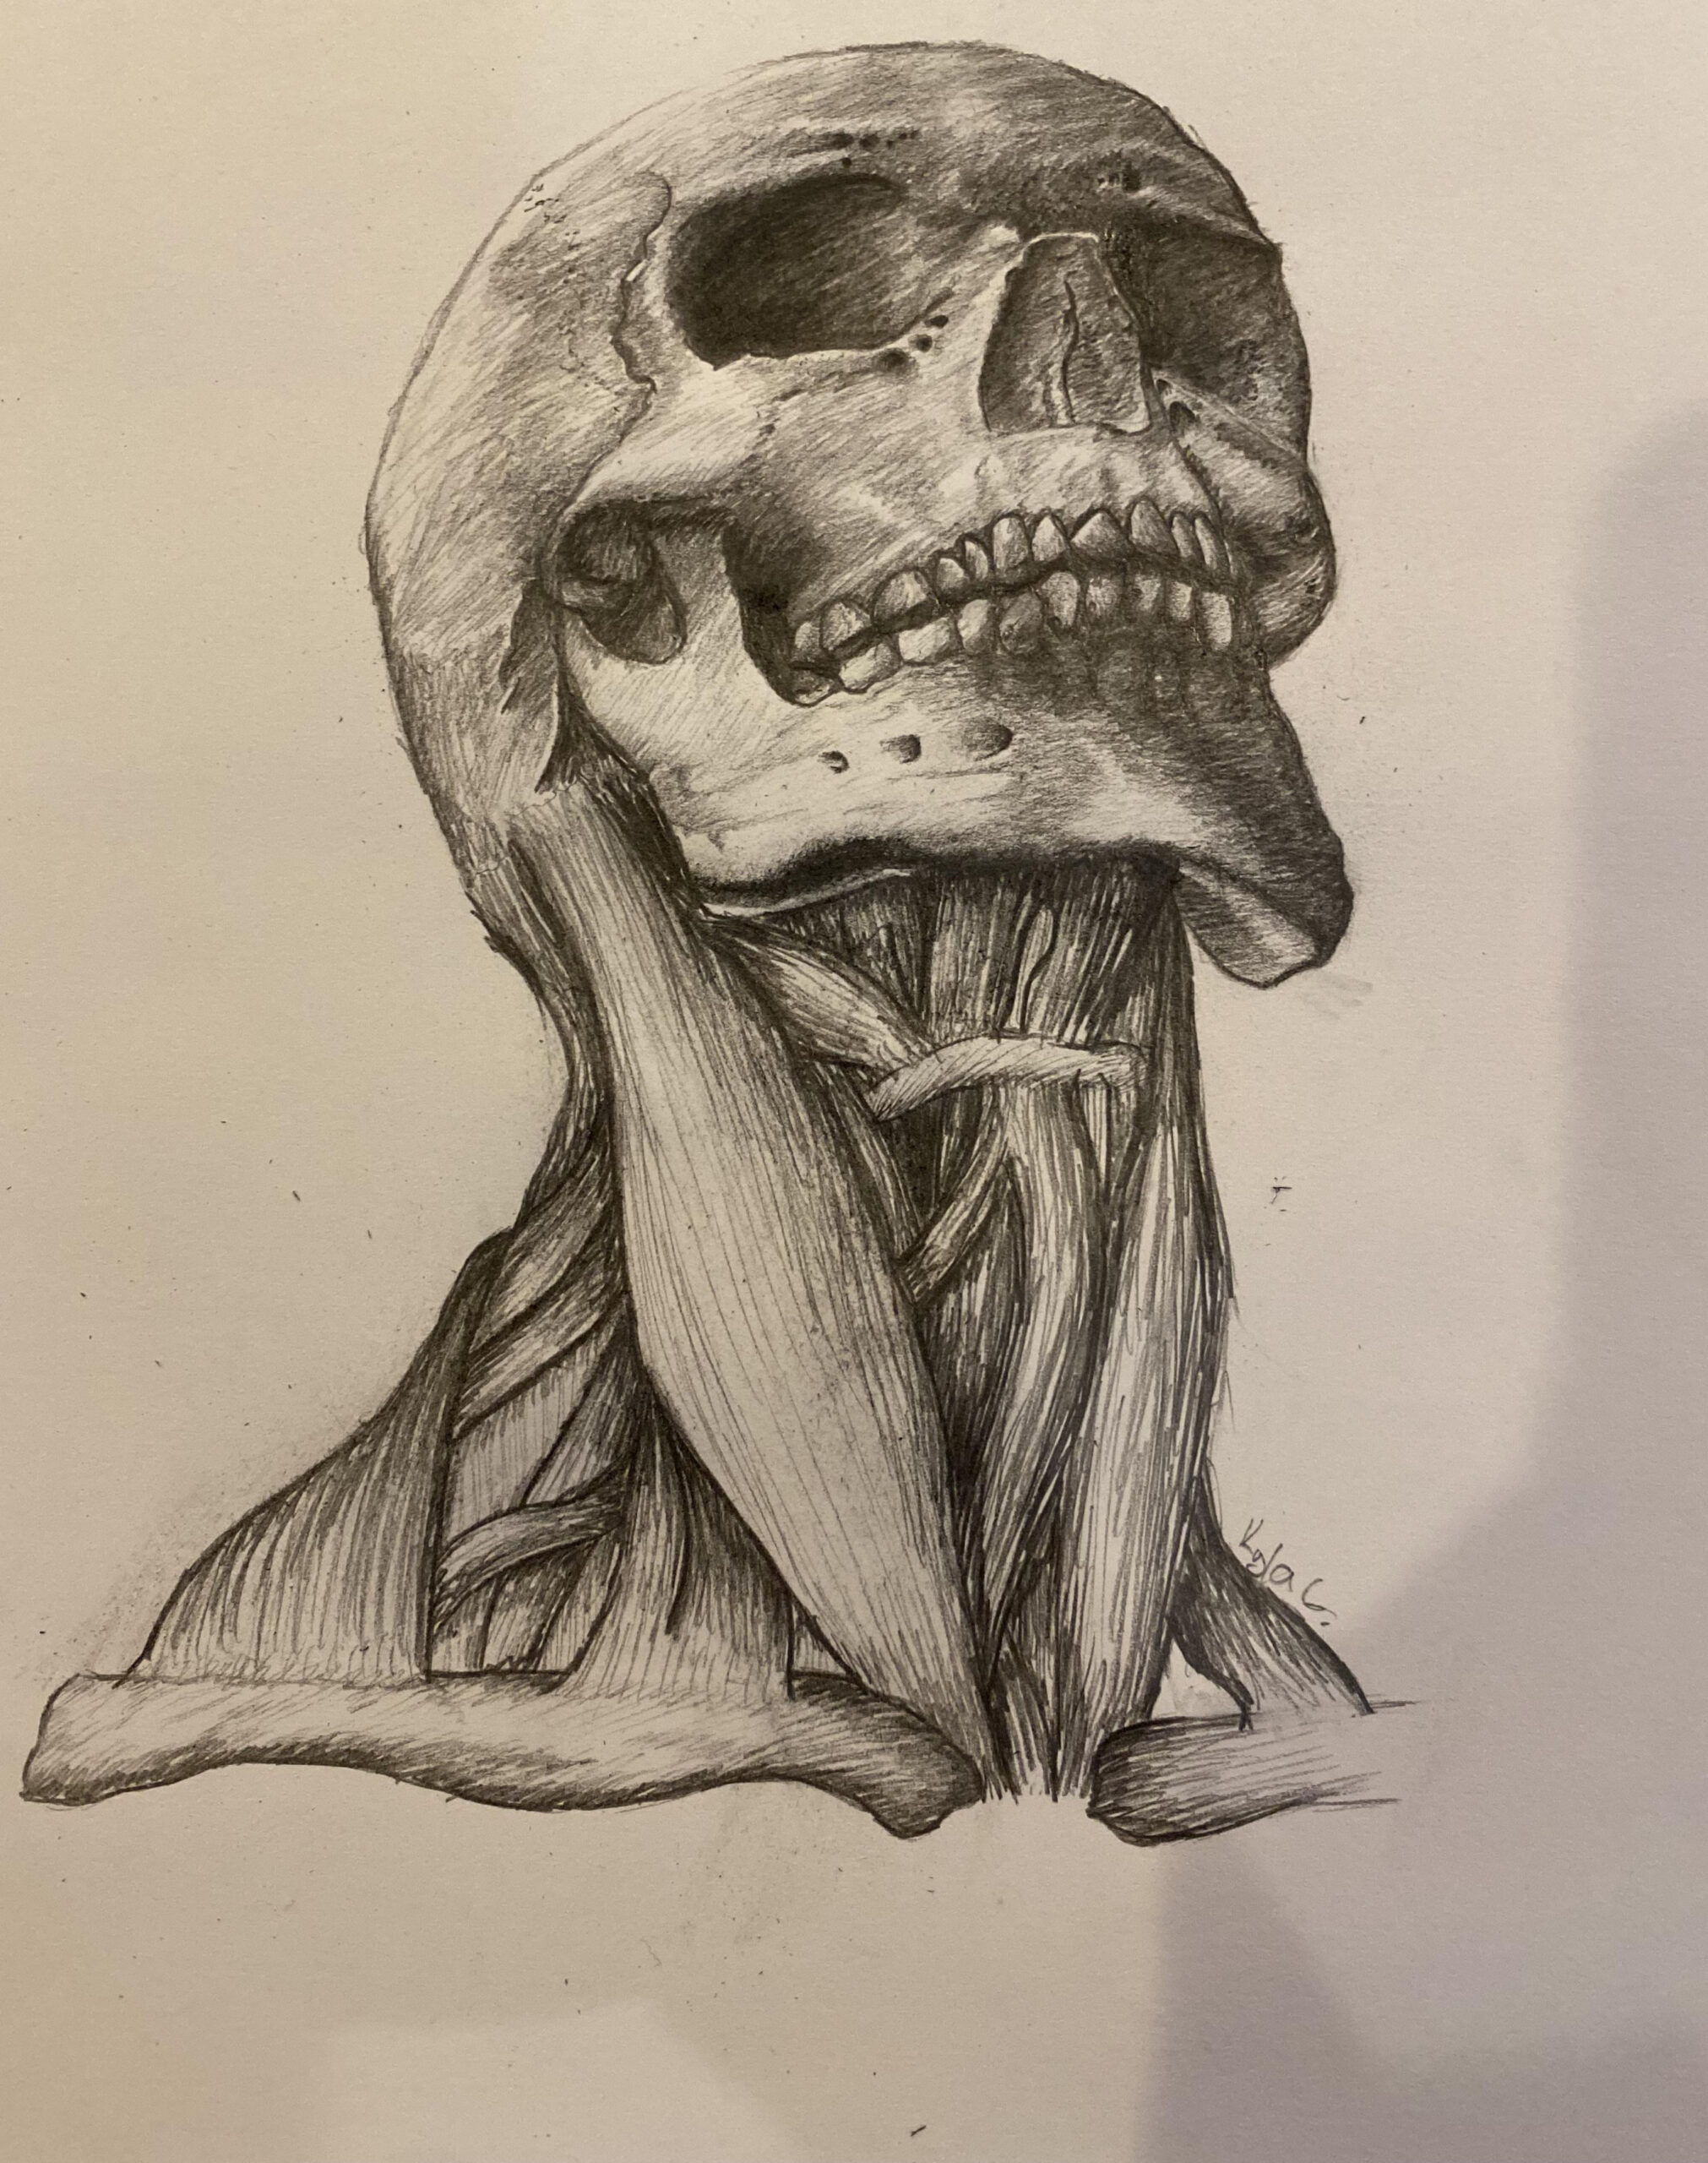 First time drawing a D skull